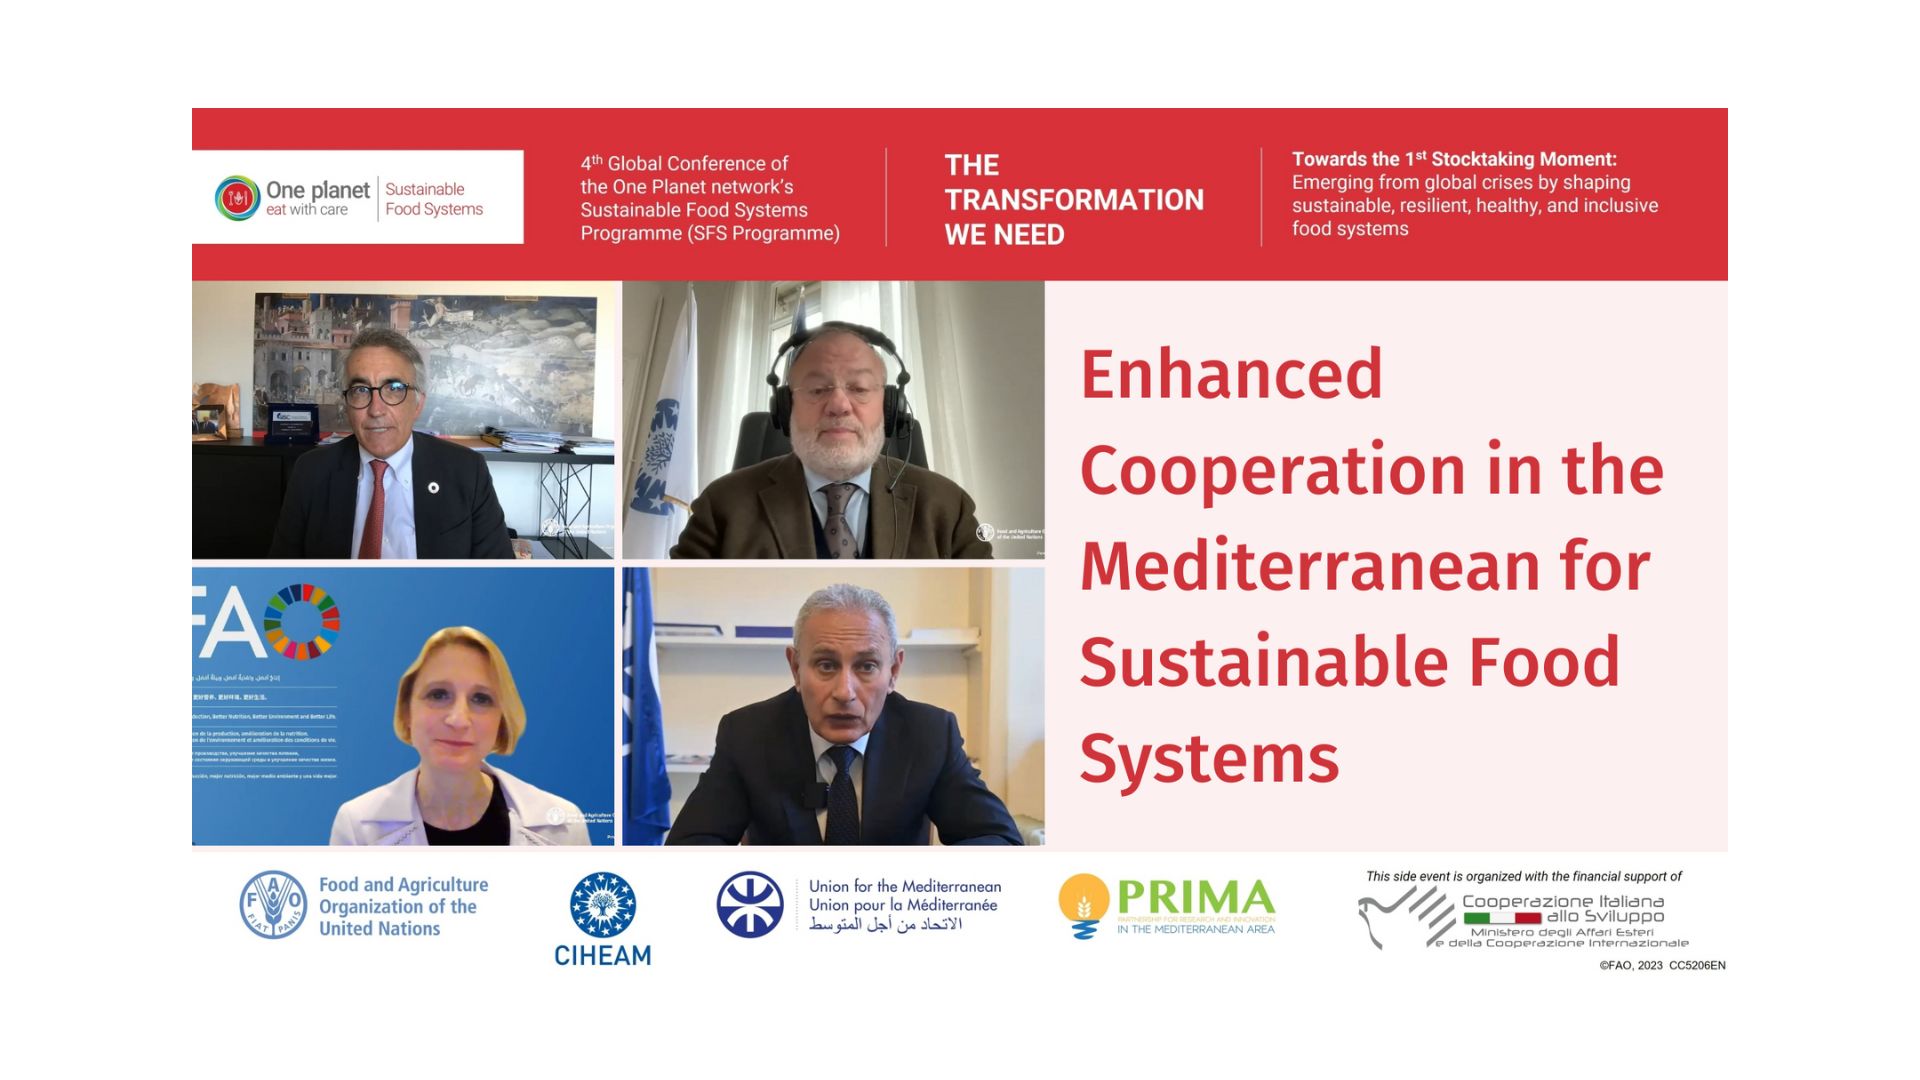 Enhanced Cooperation in the Mediterranean for Sustainable Food Systems